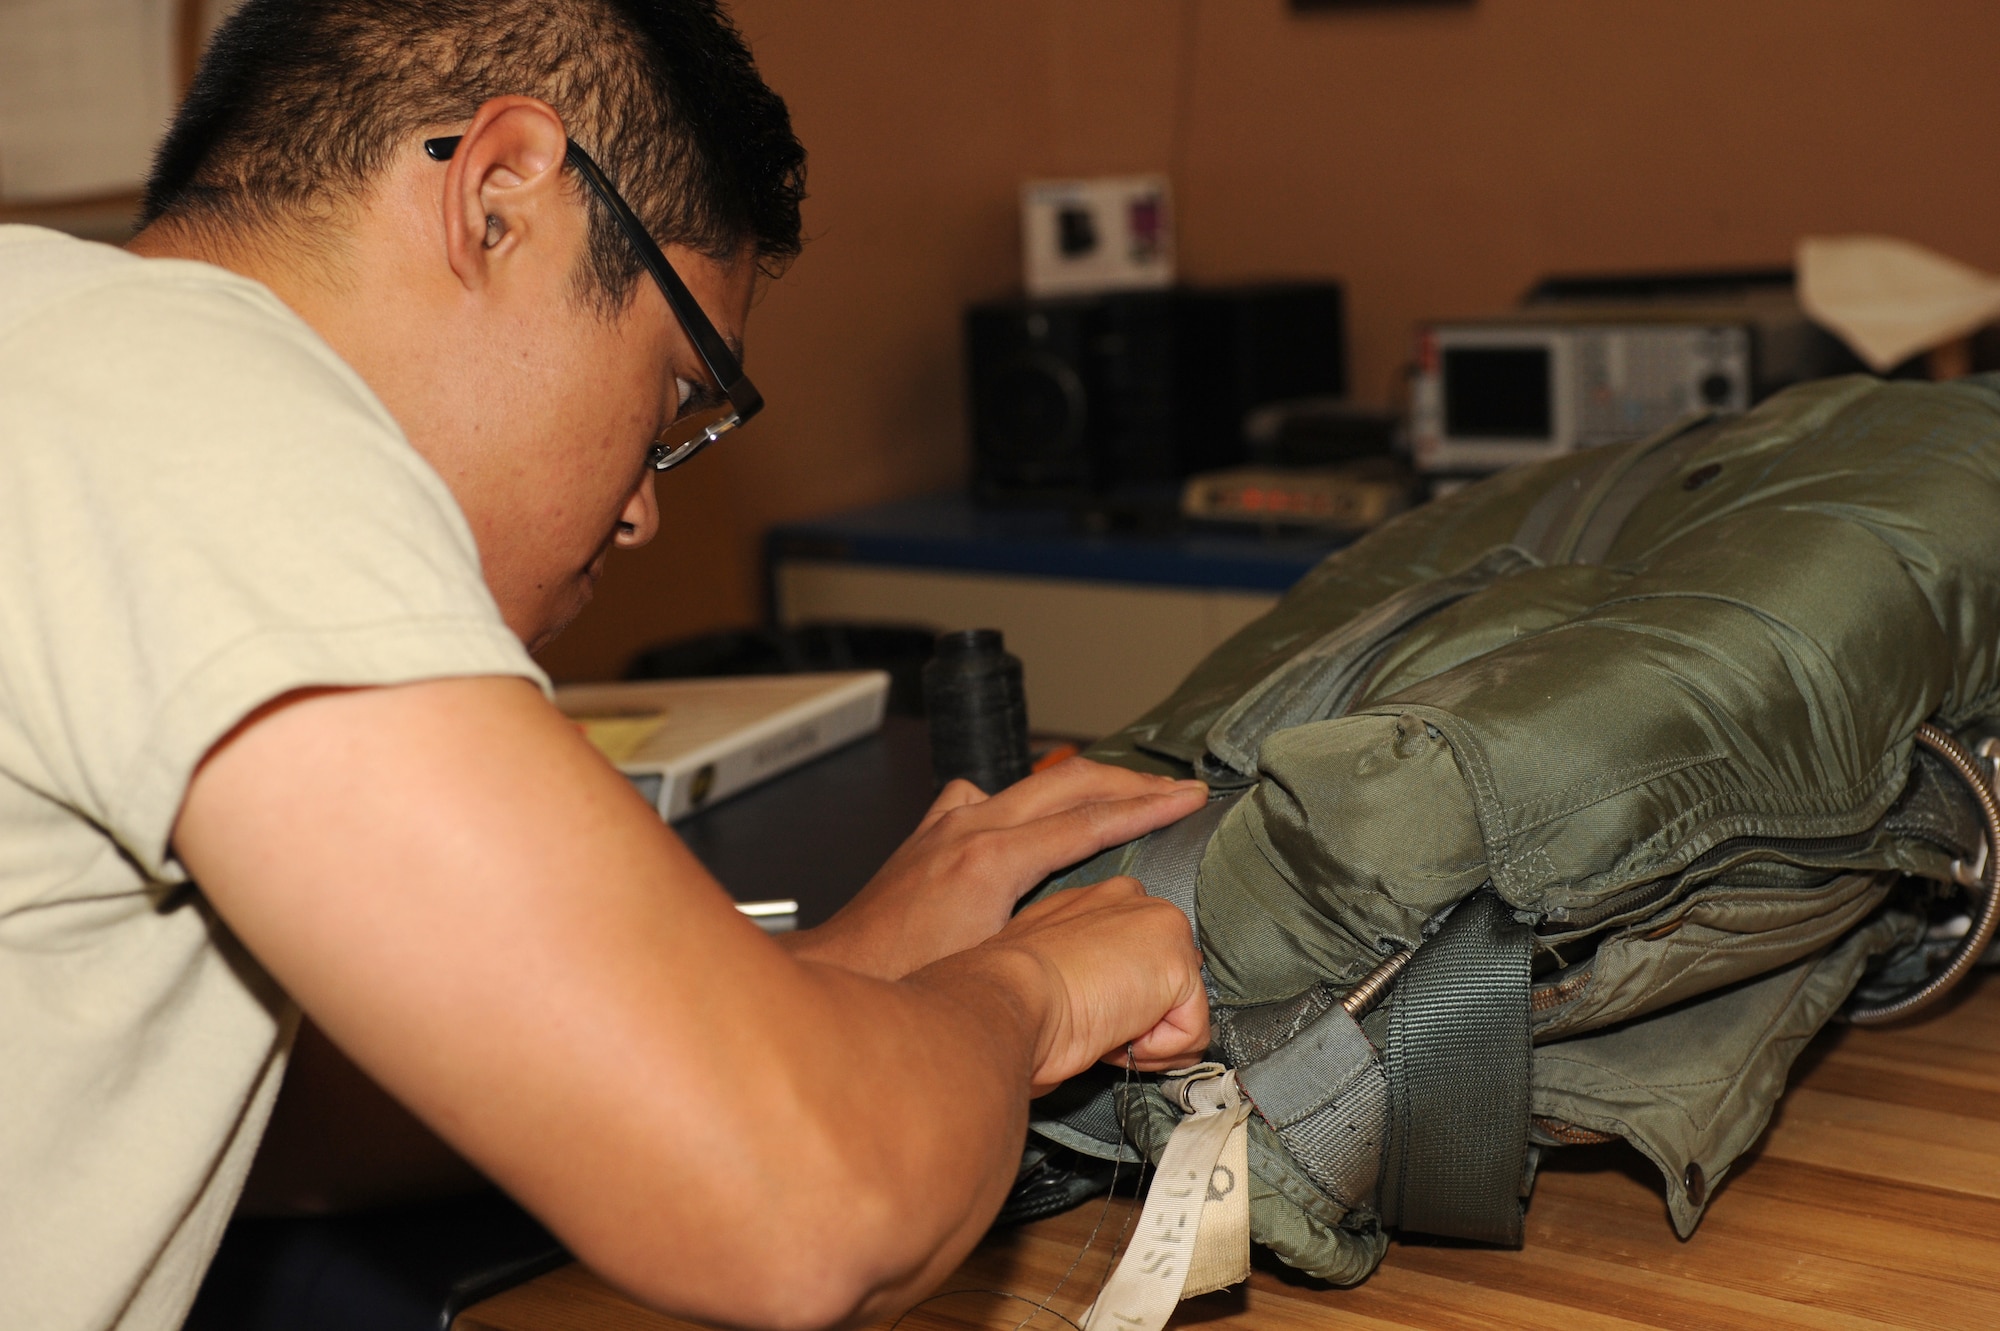 U.S. Air Force Airman 1st Class Daniel Ramos, 563rd Operations Support Squadron aircrew flight equipment technician, repairs a strap on a back style automatic-18 parachute during a 30-day inspection on Davis-Monthan Air Force Base, Ariz., Sept 24, 2012. The 30-day inspection is used to make sure that all prepositioned safety equipment is functional and up to date for inspections. (U.S. Air Force photo by Senior Airman Timothy Moore/Released)